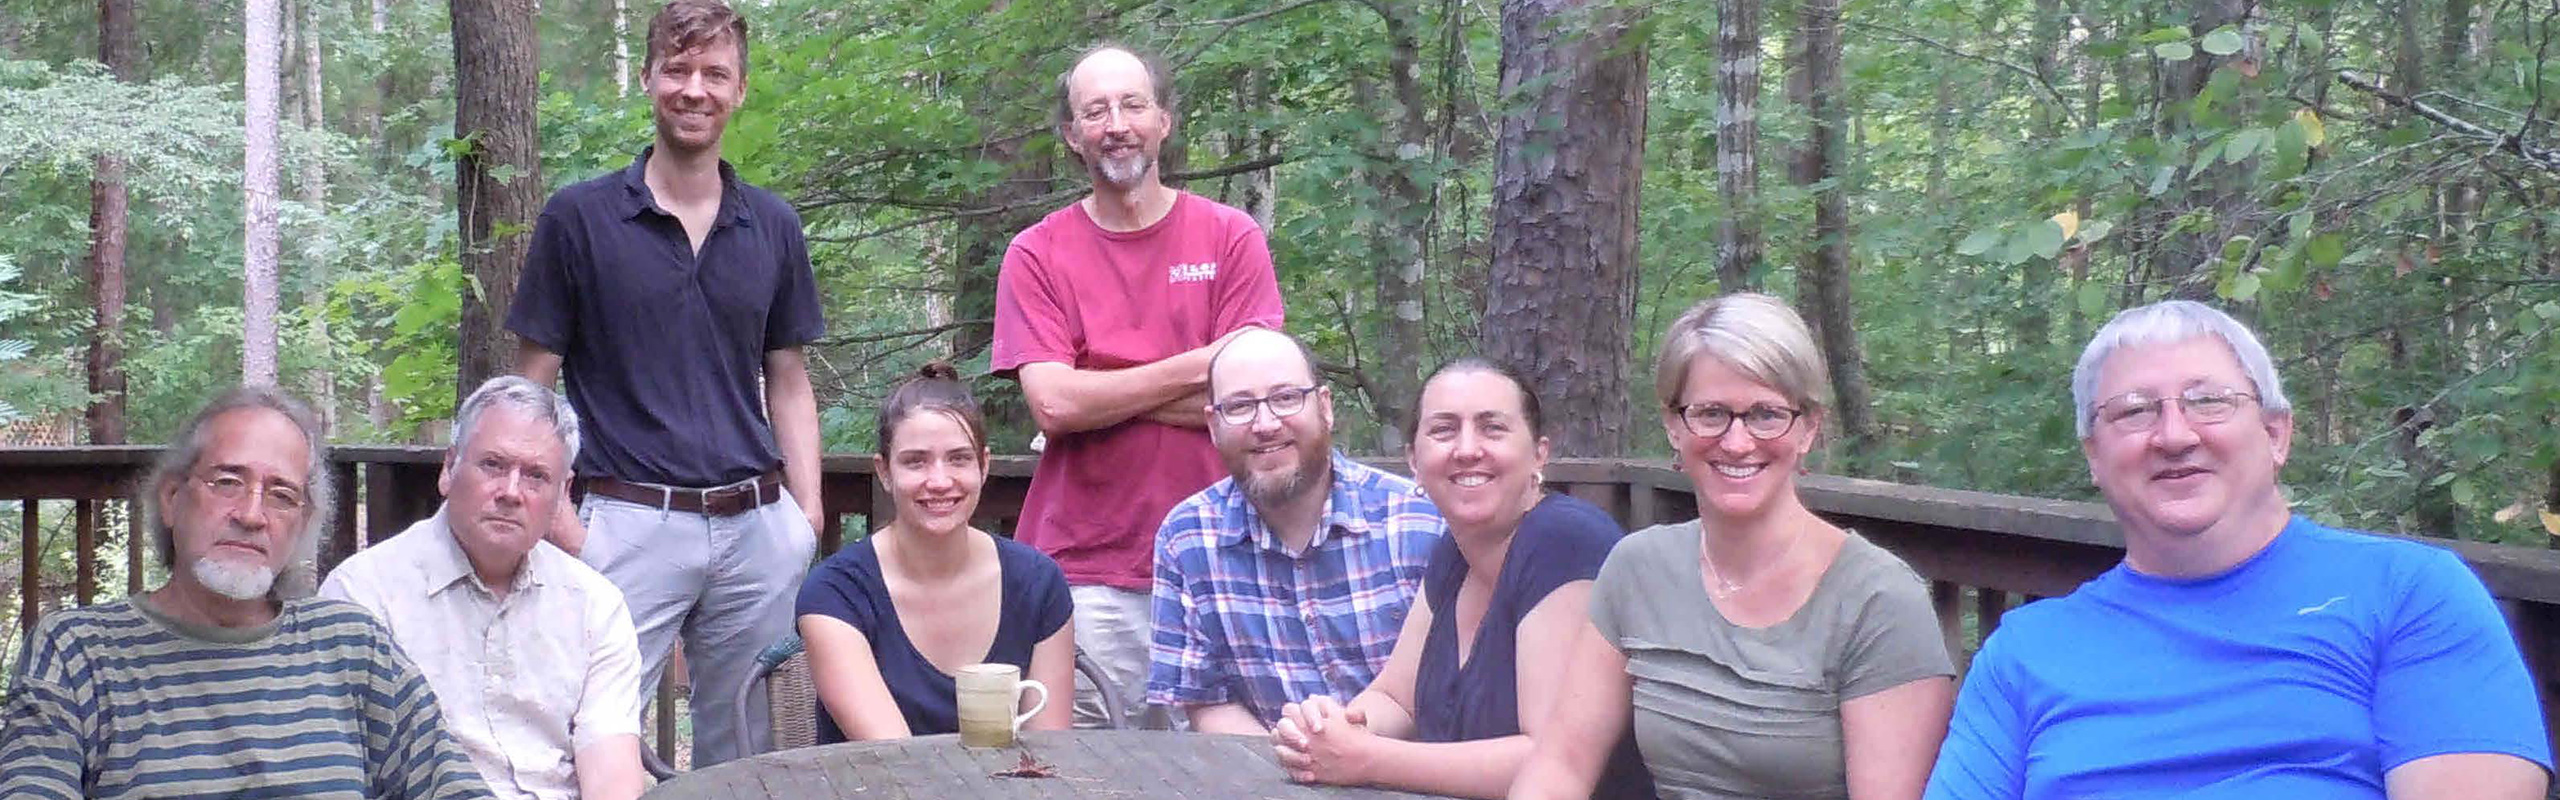 Philosphy department faculty at their 2016 department retreat